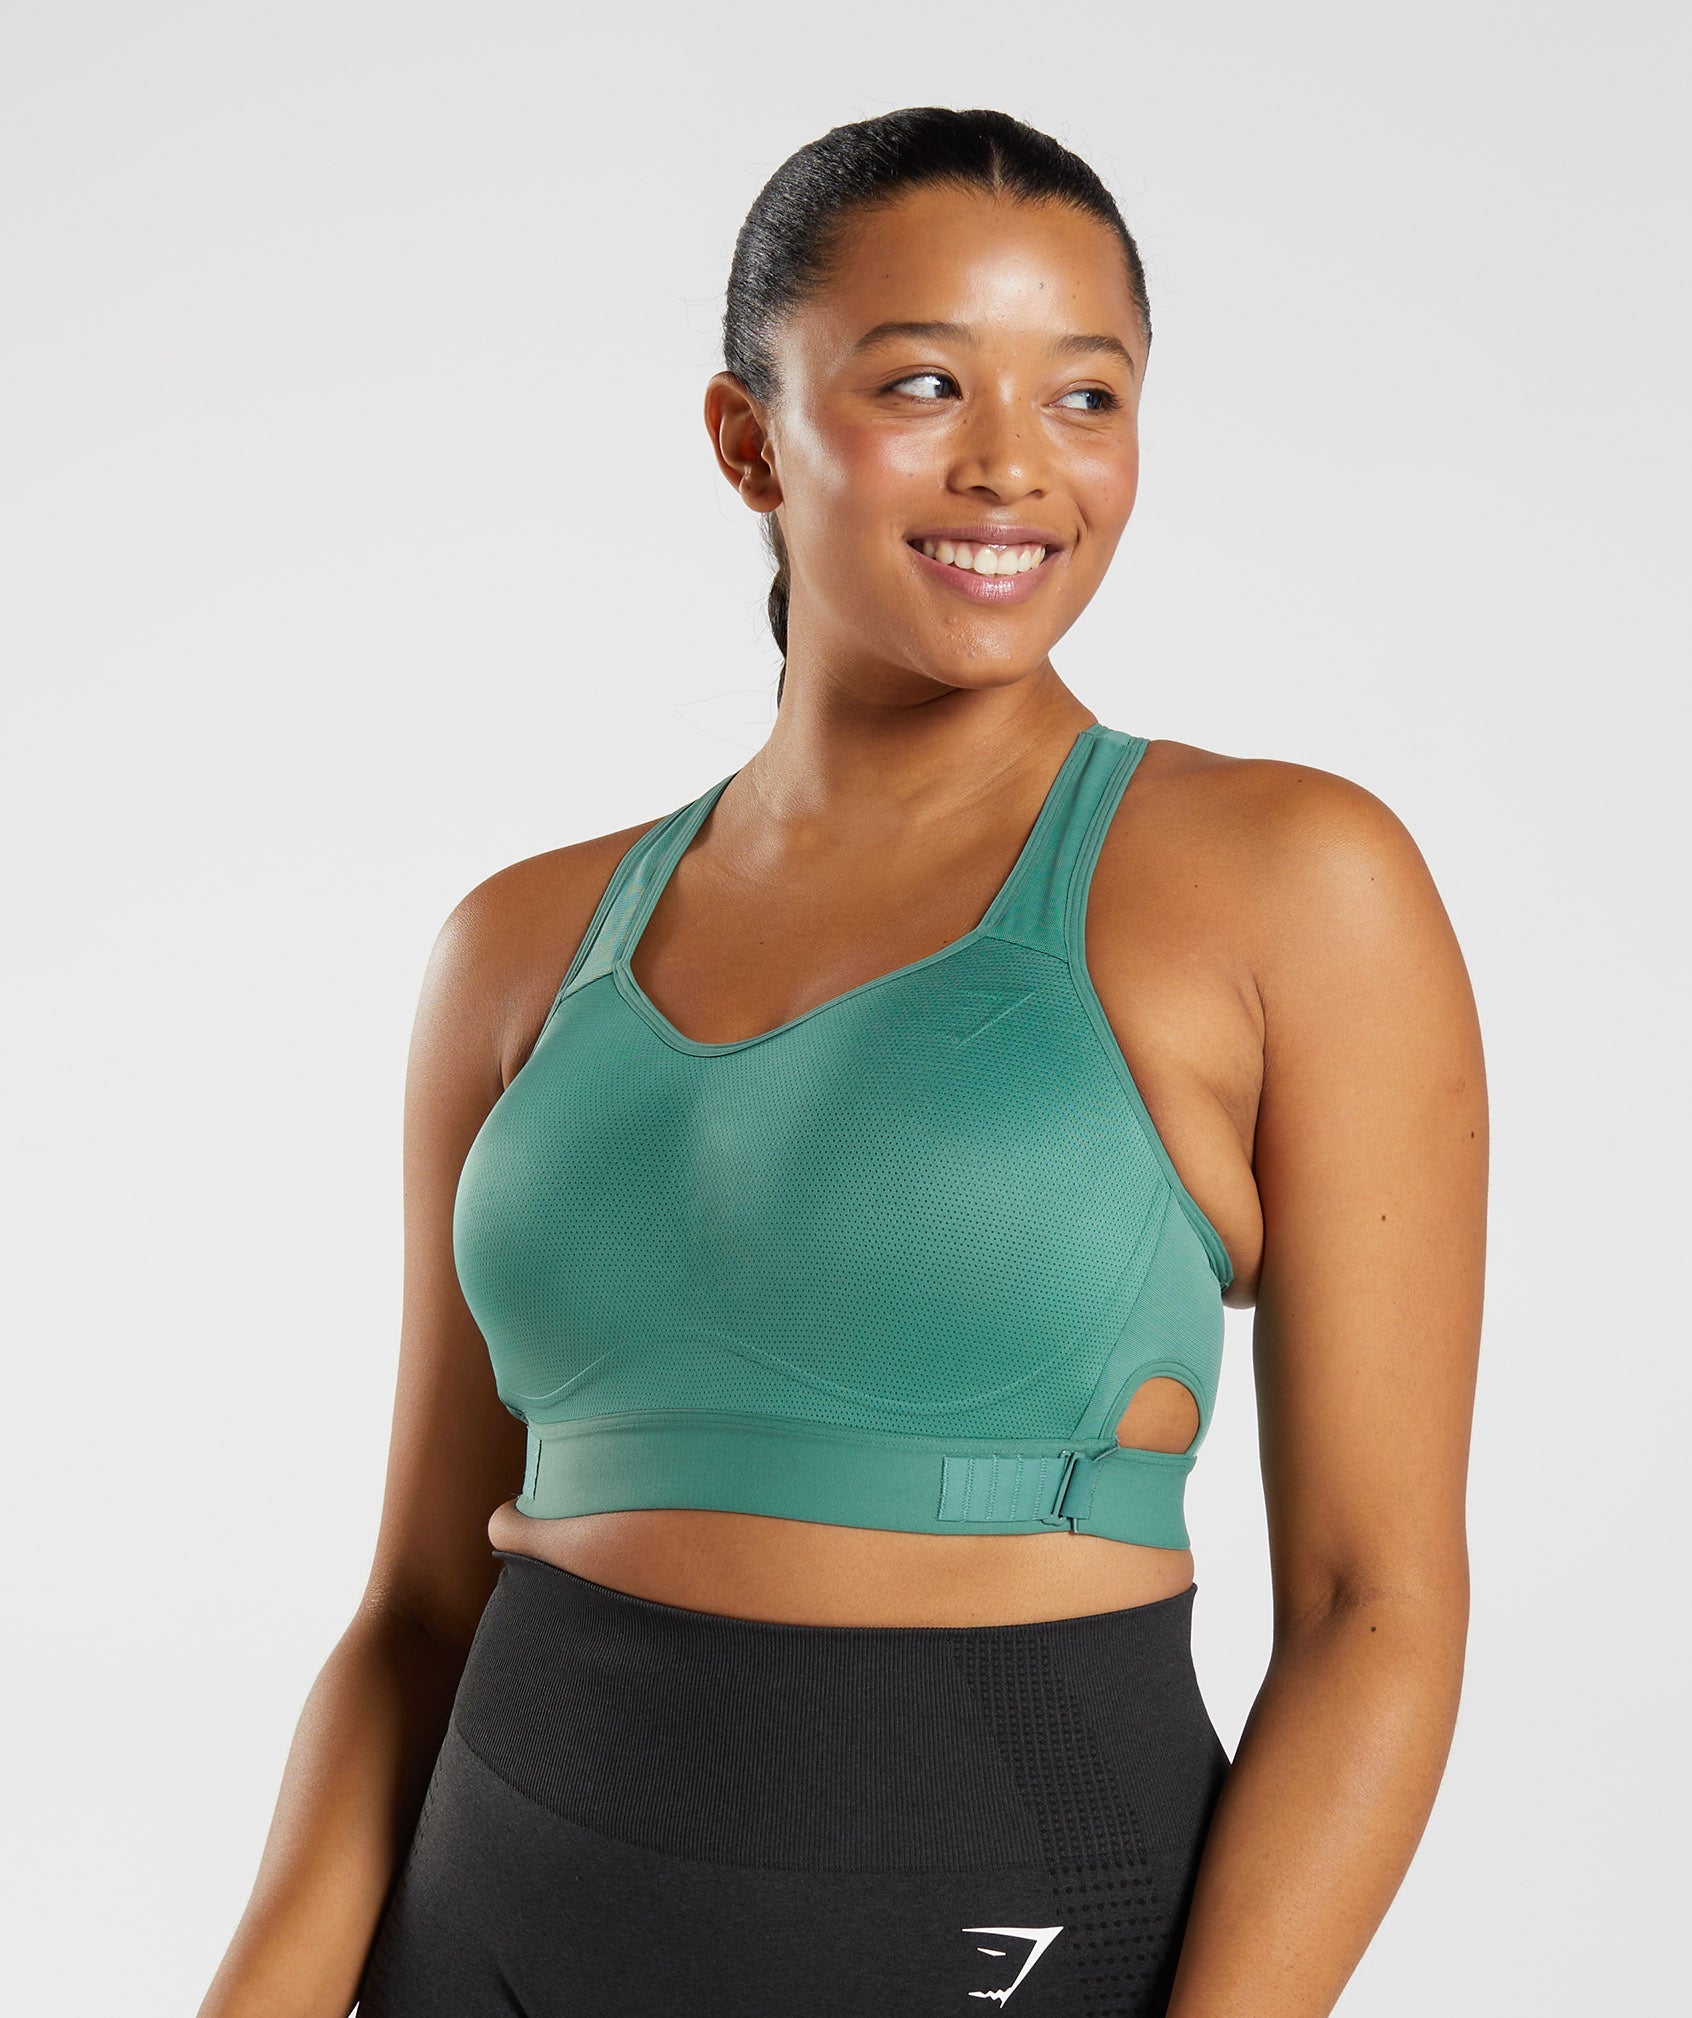 Gymshark Tan/Green Double Layer Sports Bra Size XS - $20 - From Abby